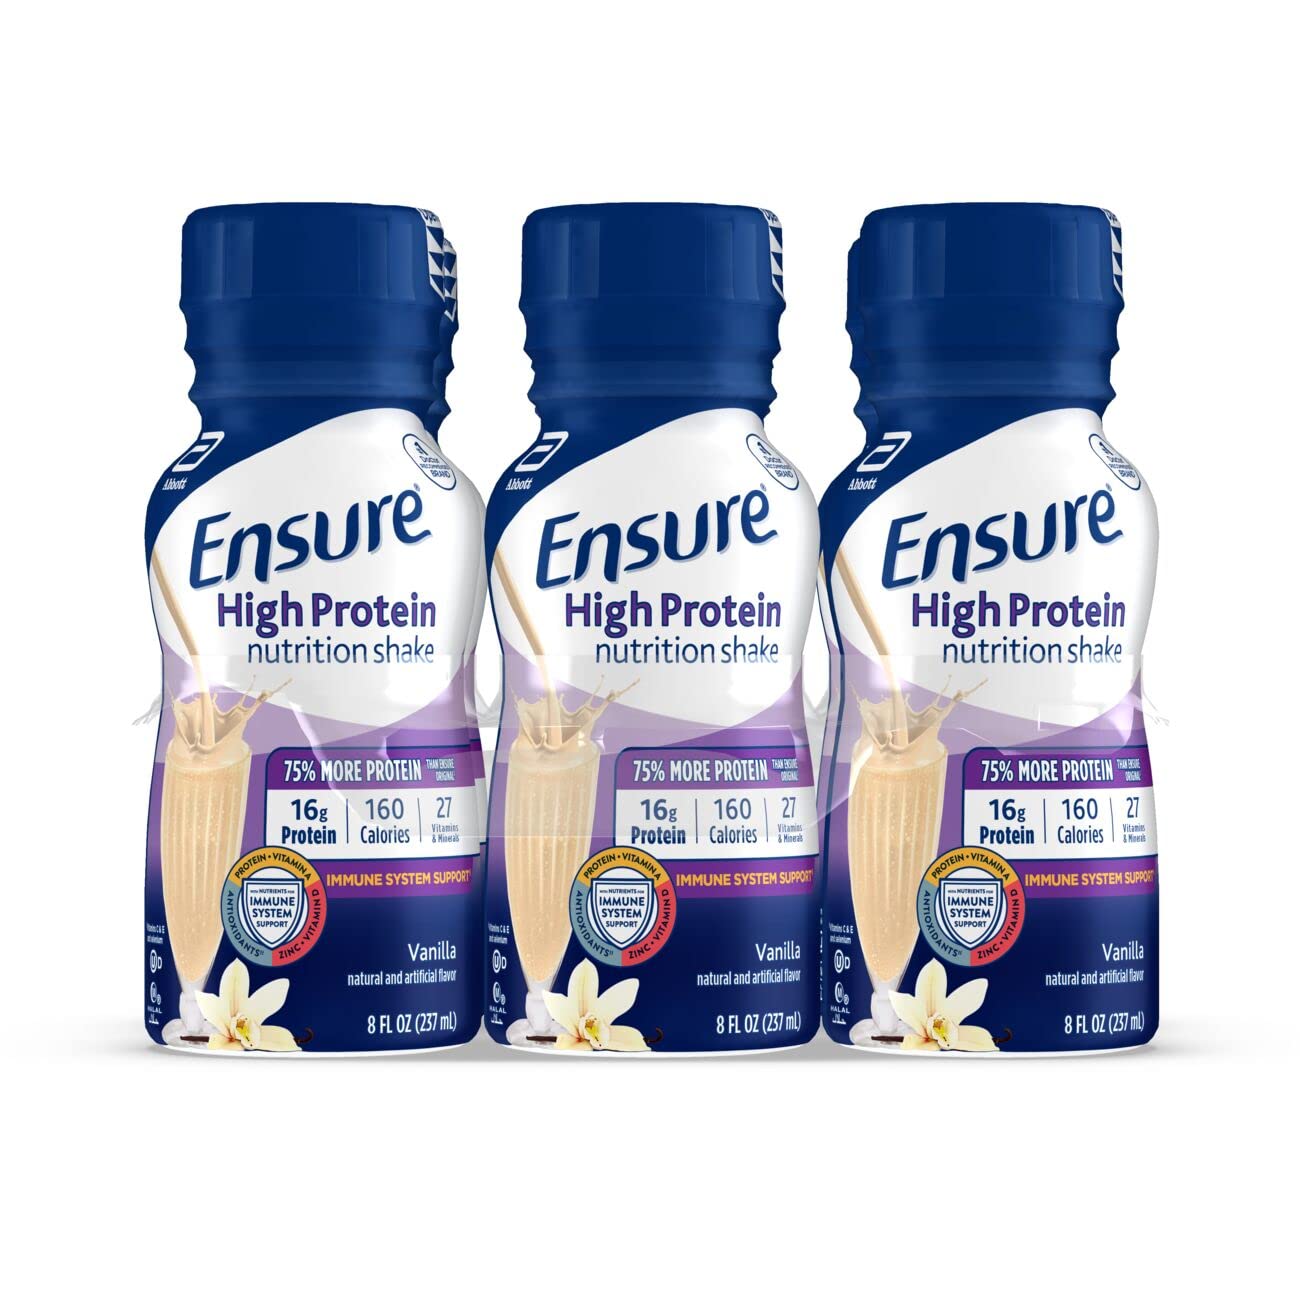 Ensure High Protein Nutritional Shake, 16g Protein, Meal Replacement Shakes, with Nutrients to Support Immune System Health, Vanilla, 8 fl oz, 6 Count